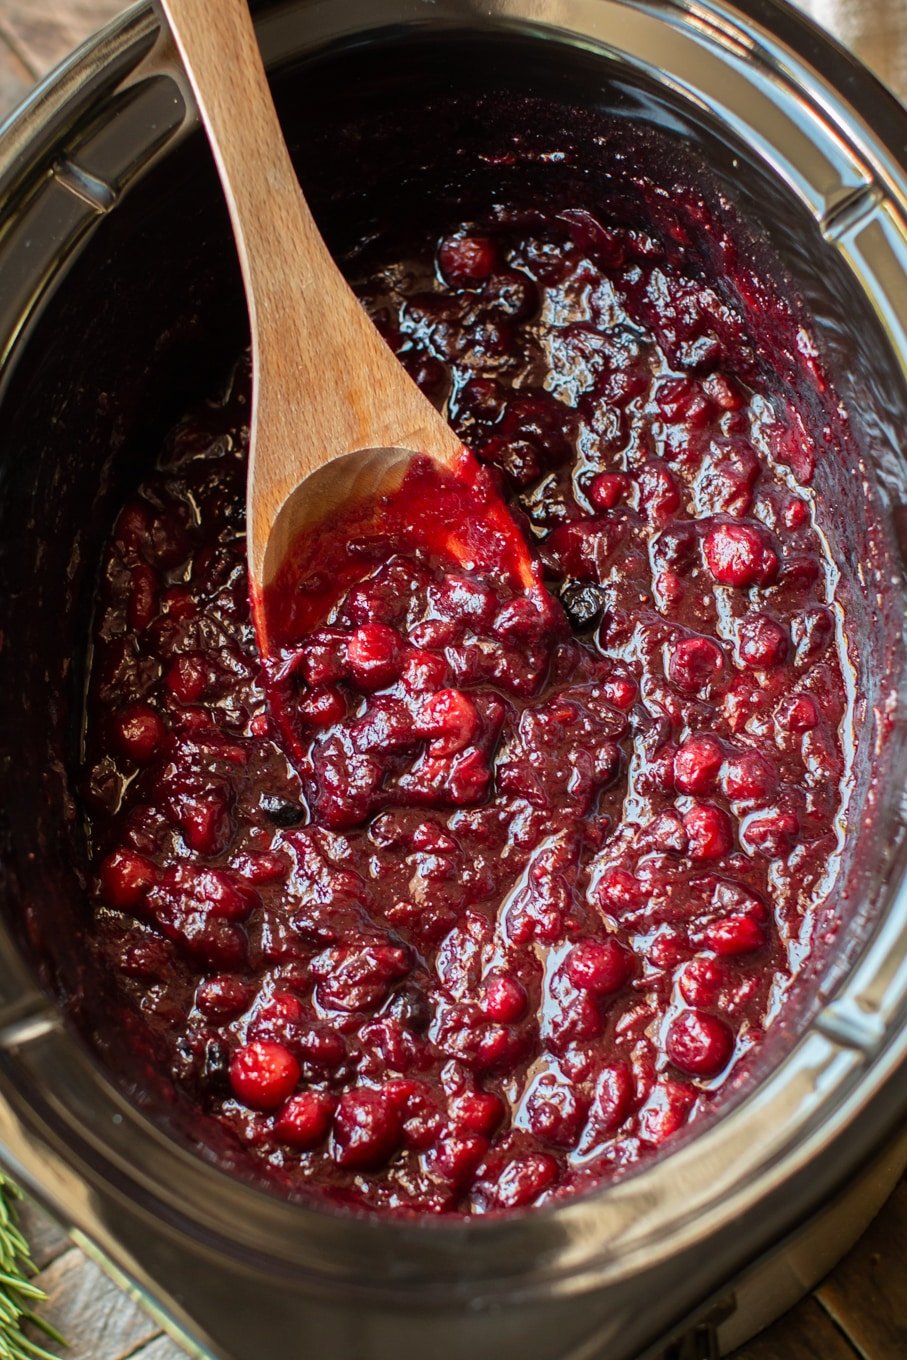 close up of bright burgundy colored cranberry sauce in a slow cooker.